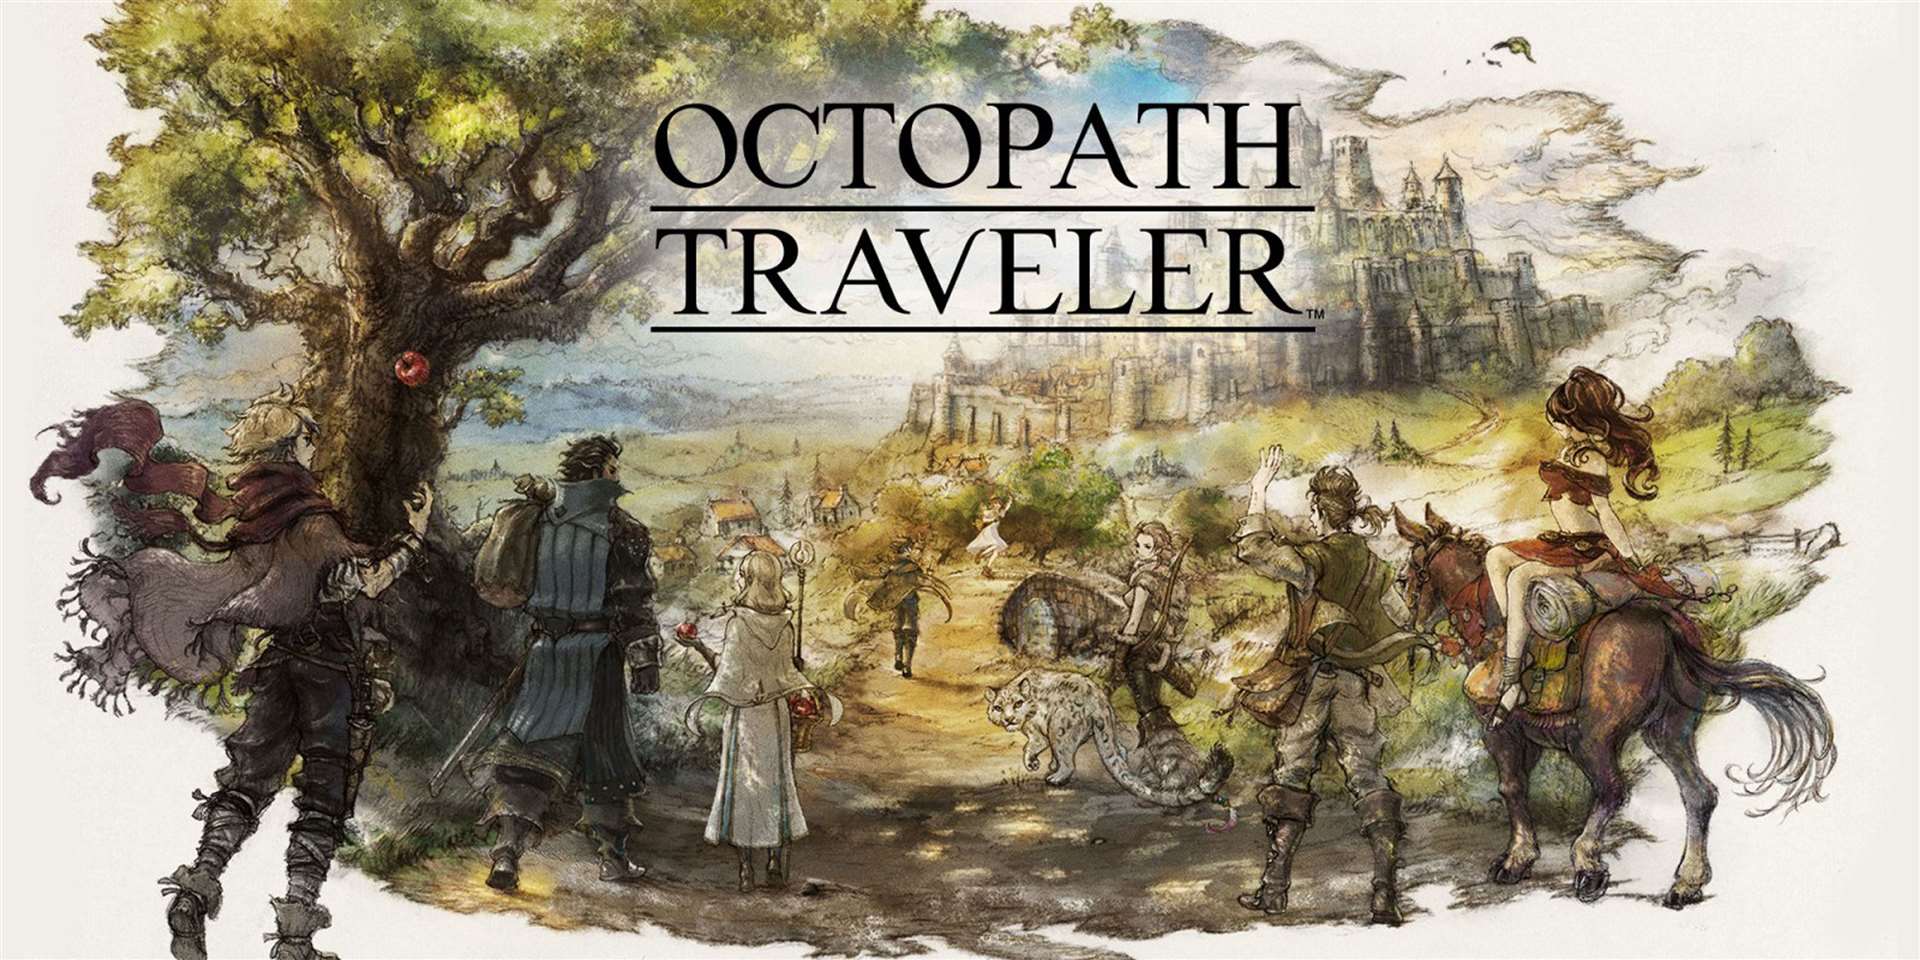 Octopath Traveler. Picture: Handout/PA